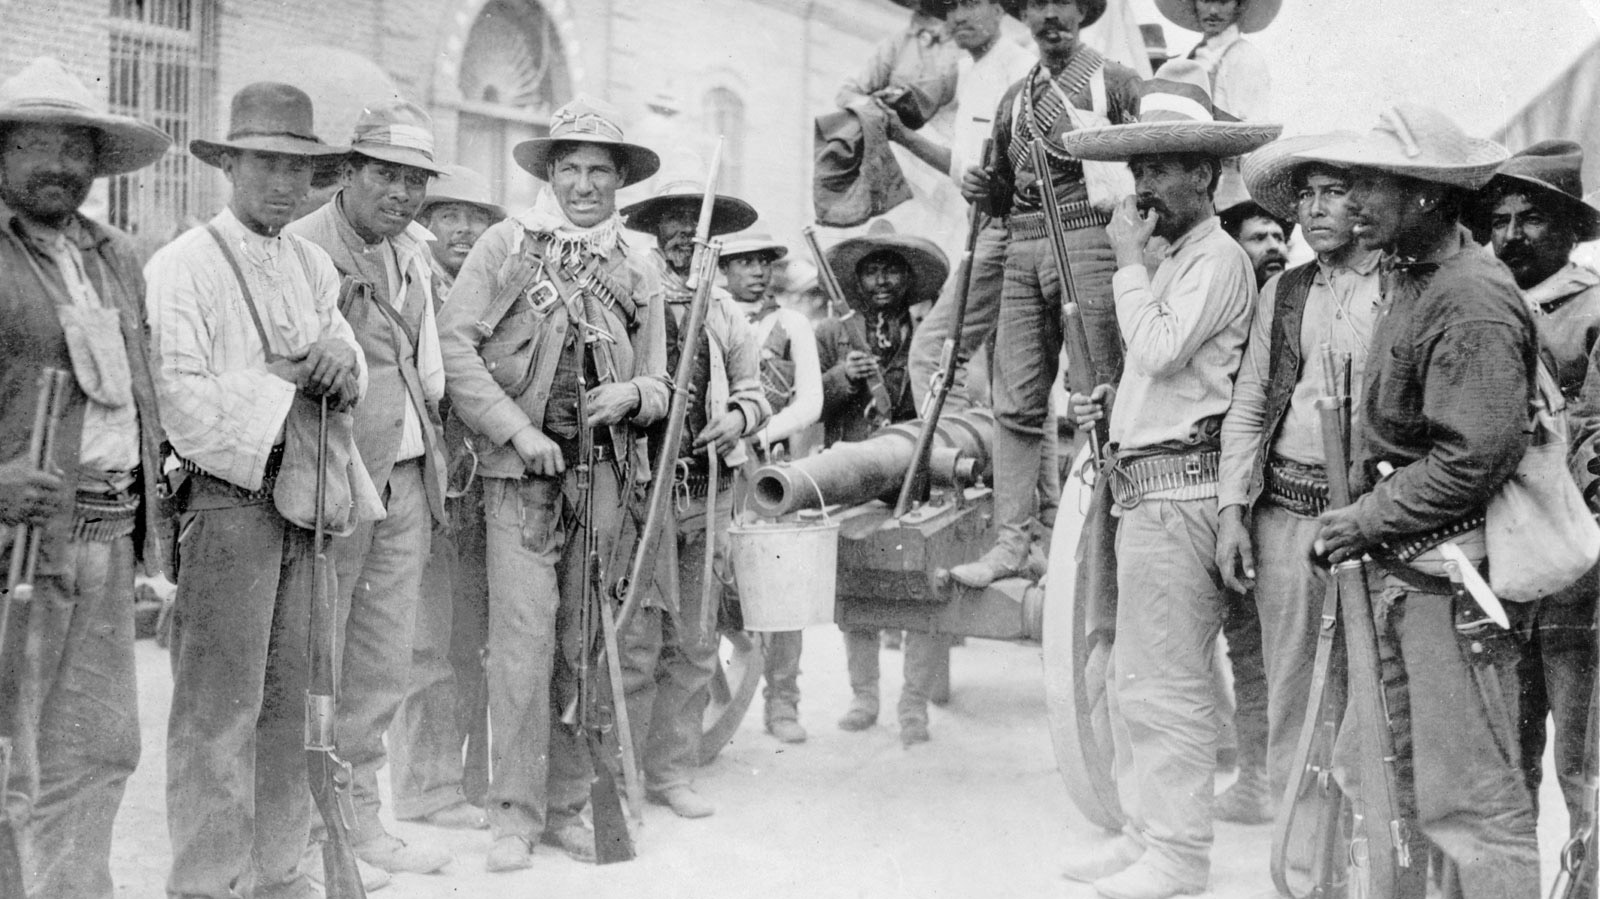 Following the Mexican Revolution